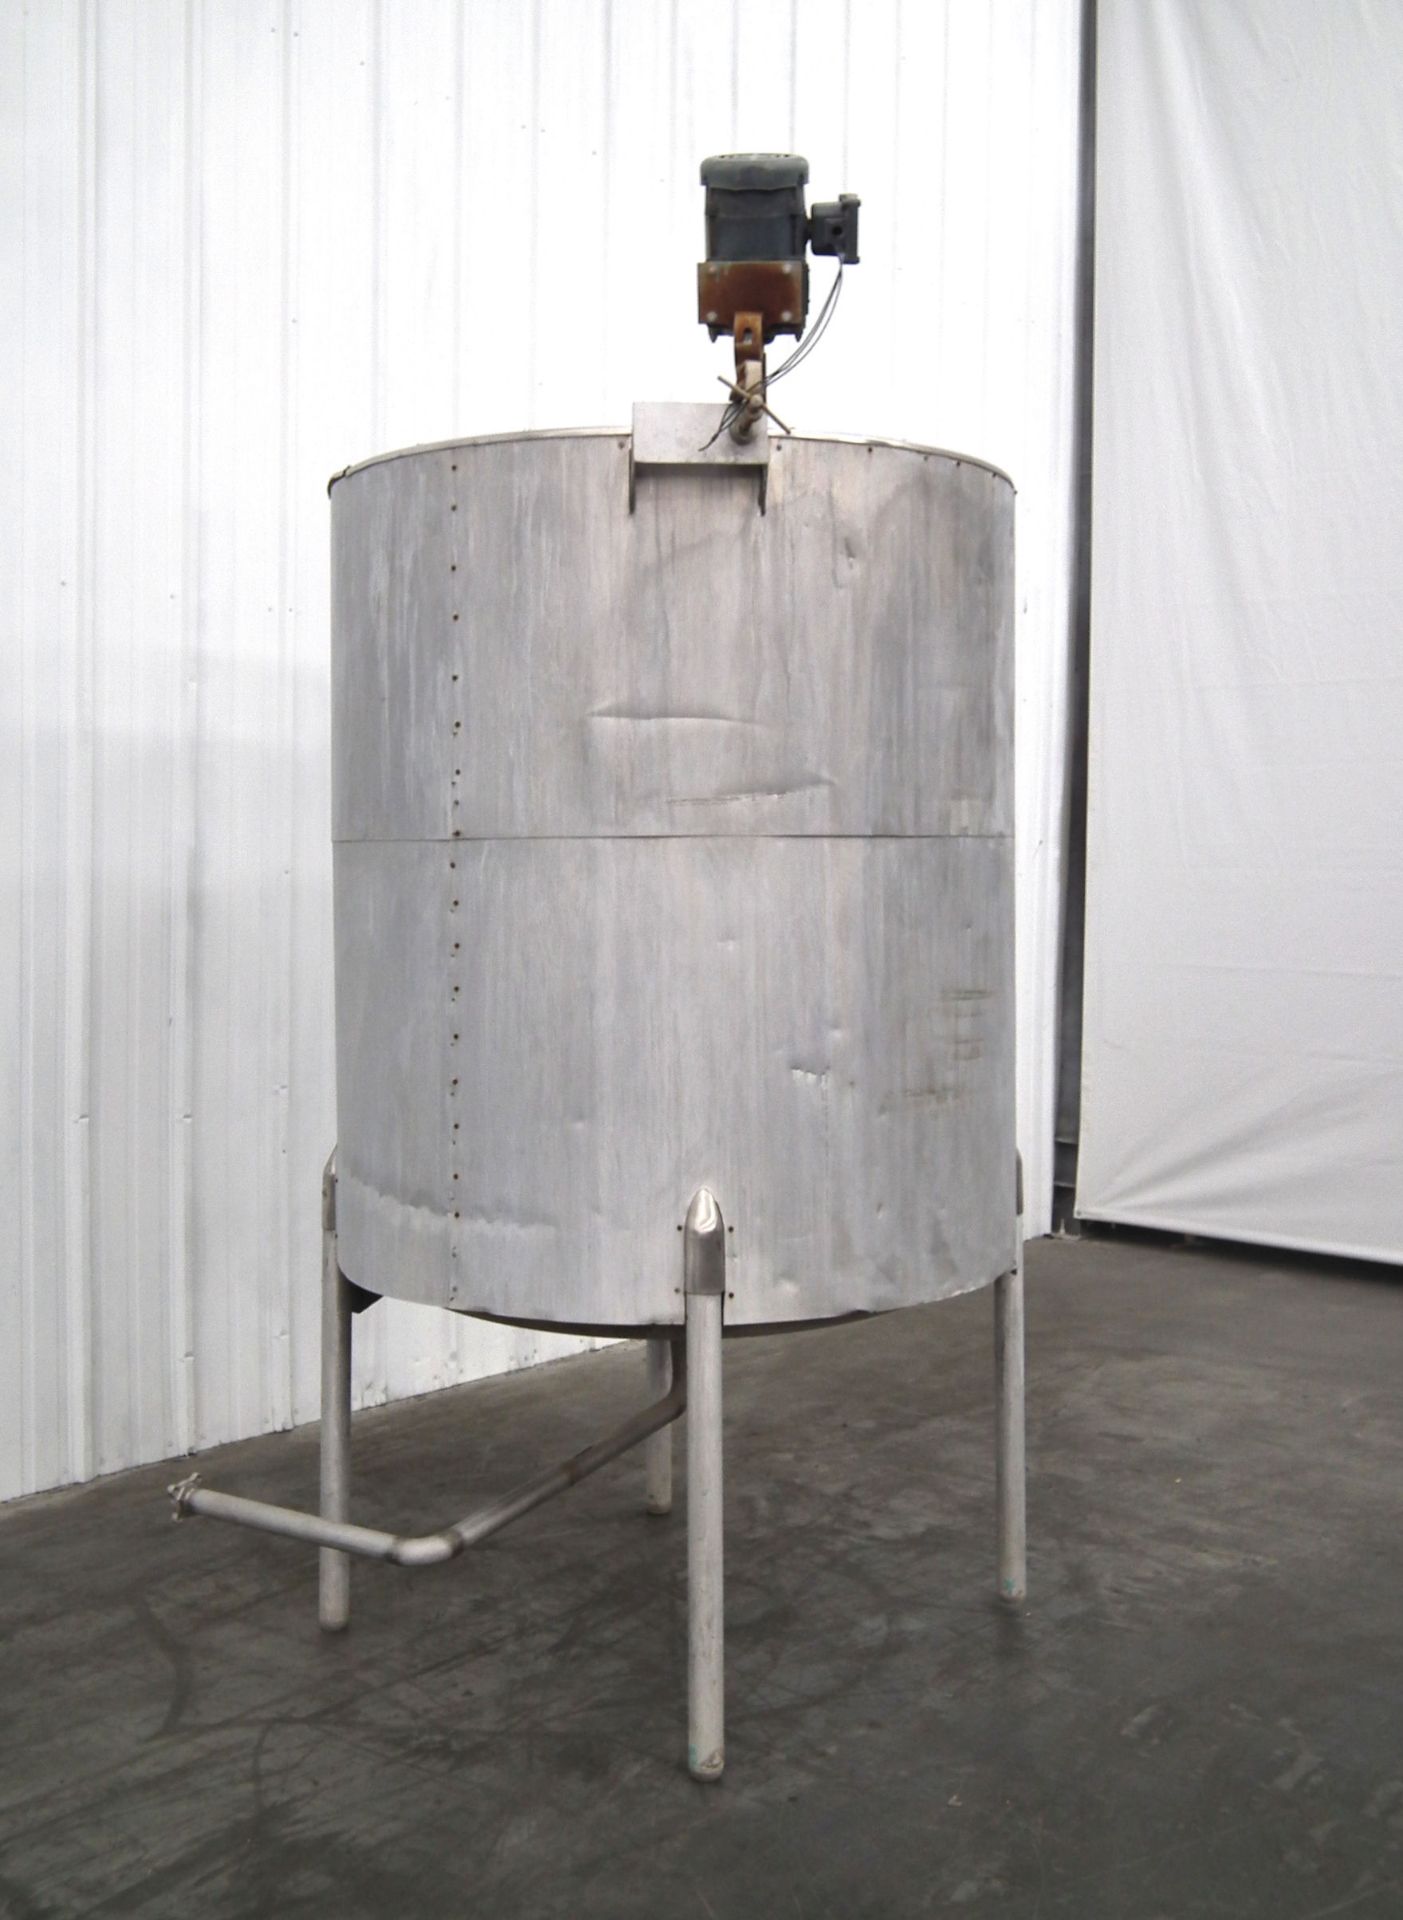 Insulated Mixing Tank with 565 Gallons Capacity A2263